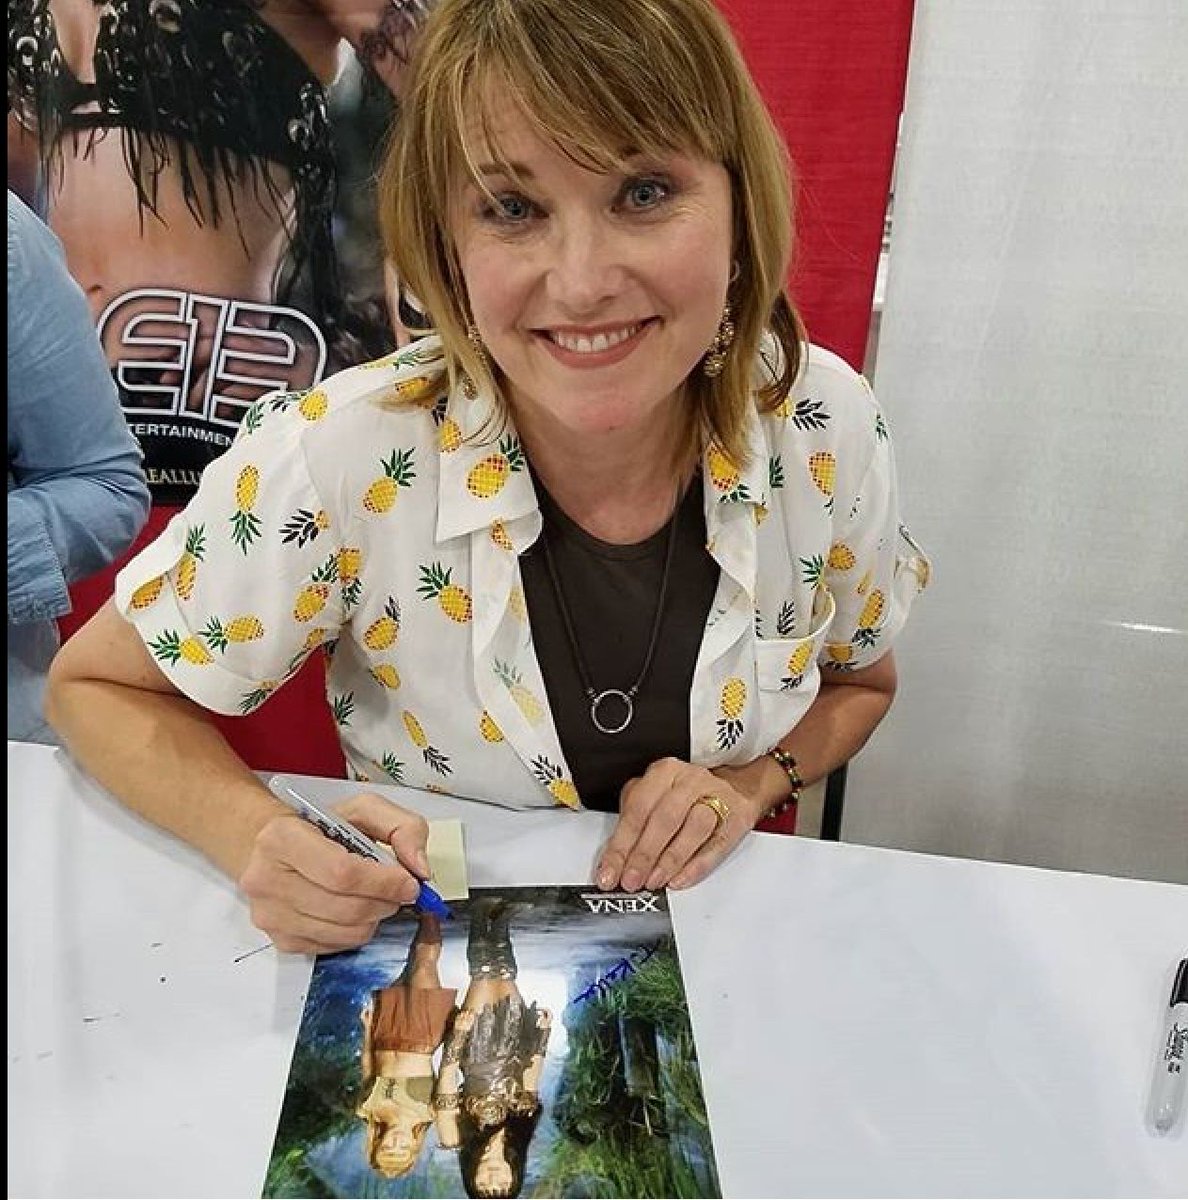 Good morning sweet @RealLucyLawless ! I hope you are having an excellent week. May your day be amazing filled with lots of joy, kindness, love, fun and inspiration. Much success and joy in your work. I miss you. I love you lots.❤️❤️❤️